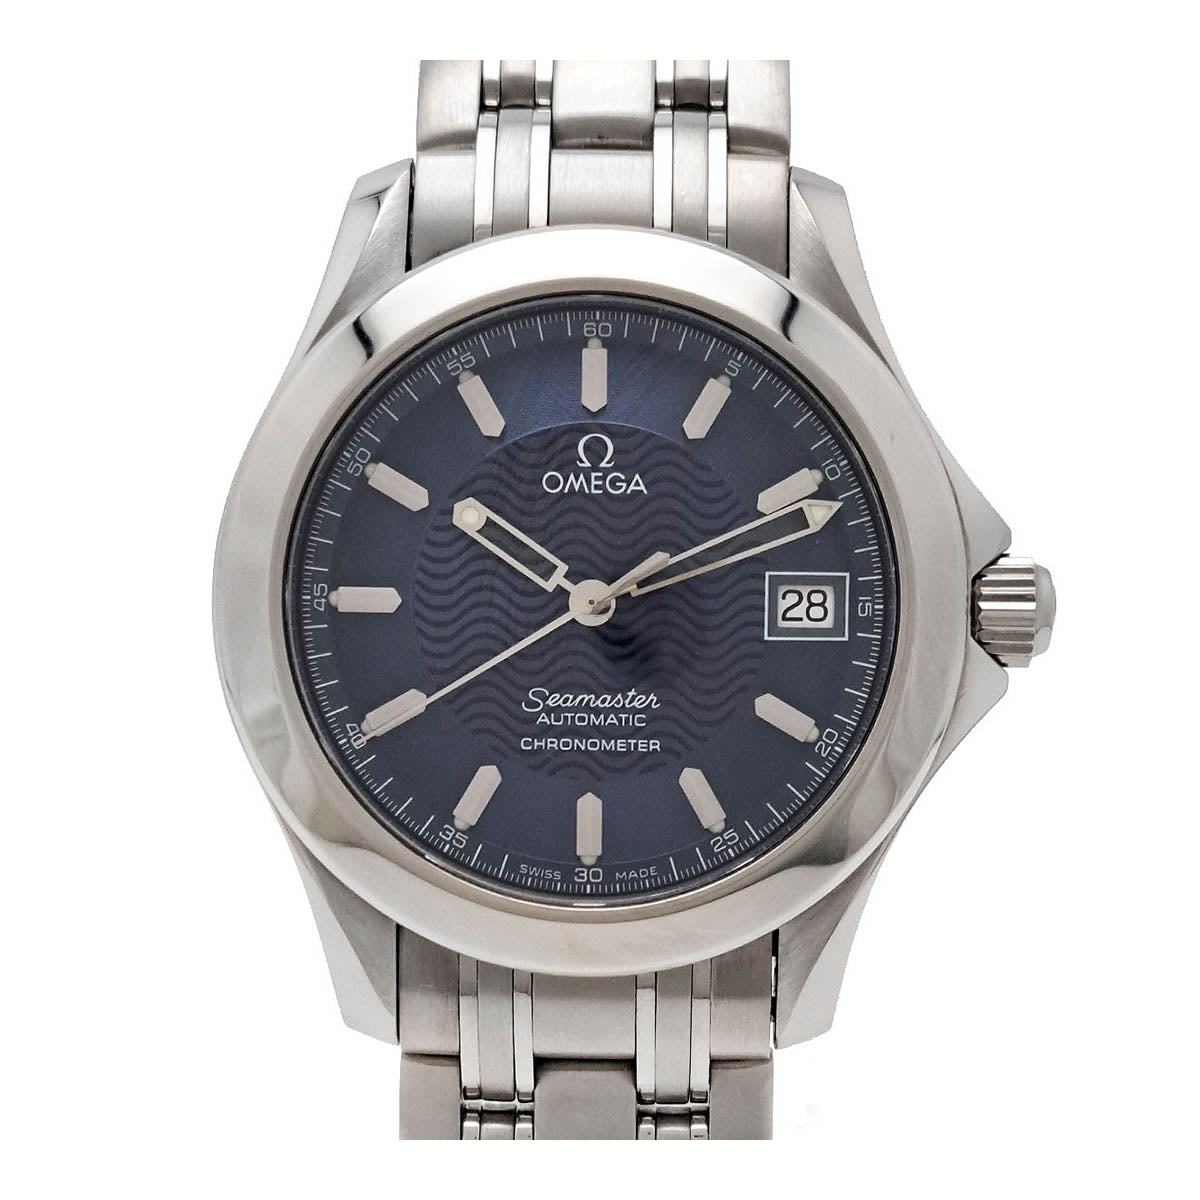 OMEGA Seamaster 120M Chronometer 2501.81 Automatic Stainless Steel Men's Watch (Pre-Owned) 2501.81